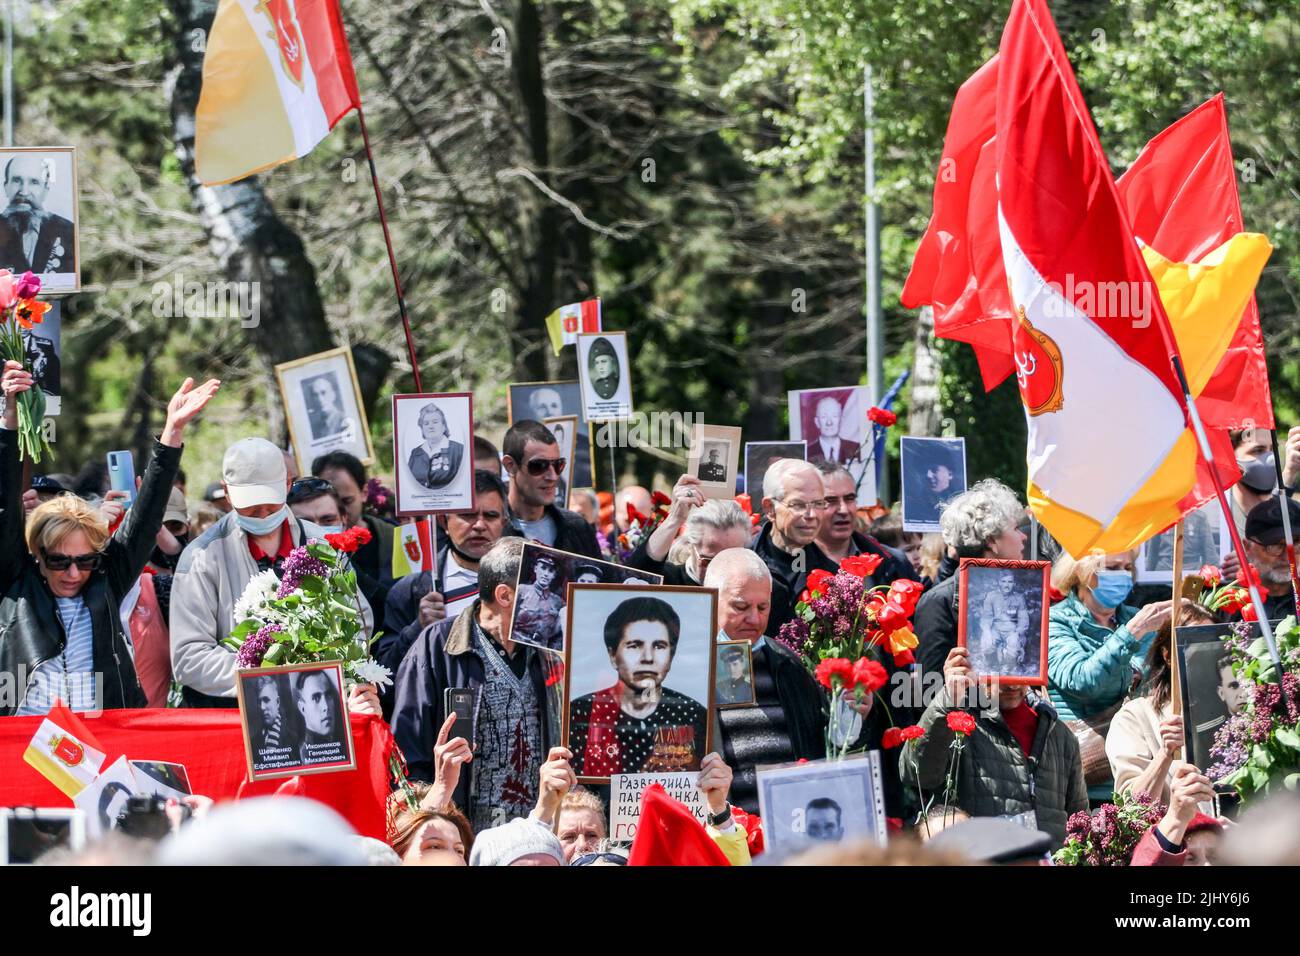 Odessa, Ukraine. 09th May, 2021. Participants of the 'Immortal Regiment' are seen carrying flowers, red flags and portraits of their relatives who fought in the Second World War. On May 9, 2021, Ukraine celebrated the 76th anniversary of the victory over Nazism in World War II; people honored the memory of the dead by laying flowers at the monument to the Unknown Sailor on the Walk of Fame in the park. T.G. Shevchenko. (Photo by Viacheslav Onyshchenko/SOPA Images/Sipa USA) Credit: Sipa USA/Alamy Live News Stock Photo